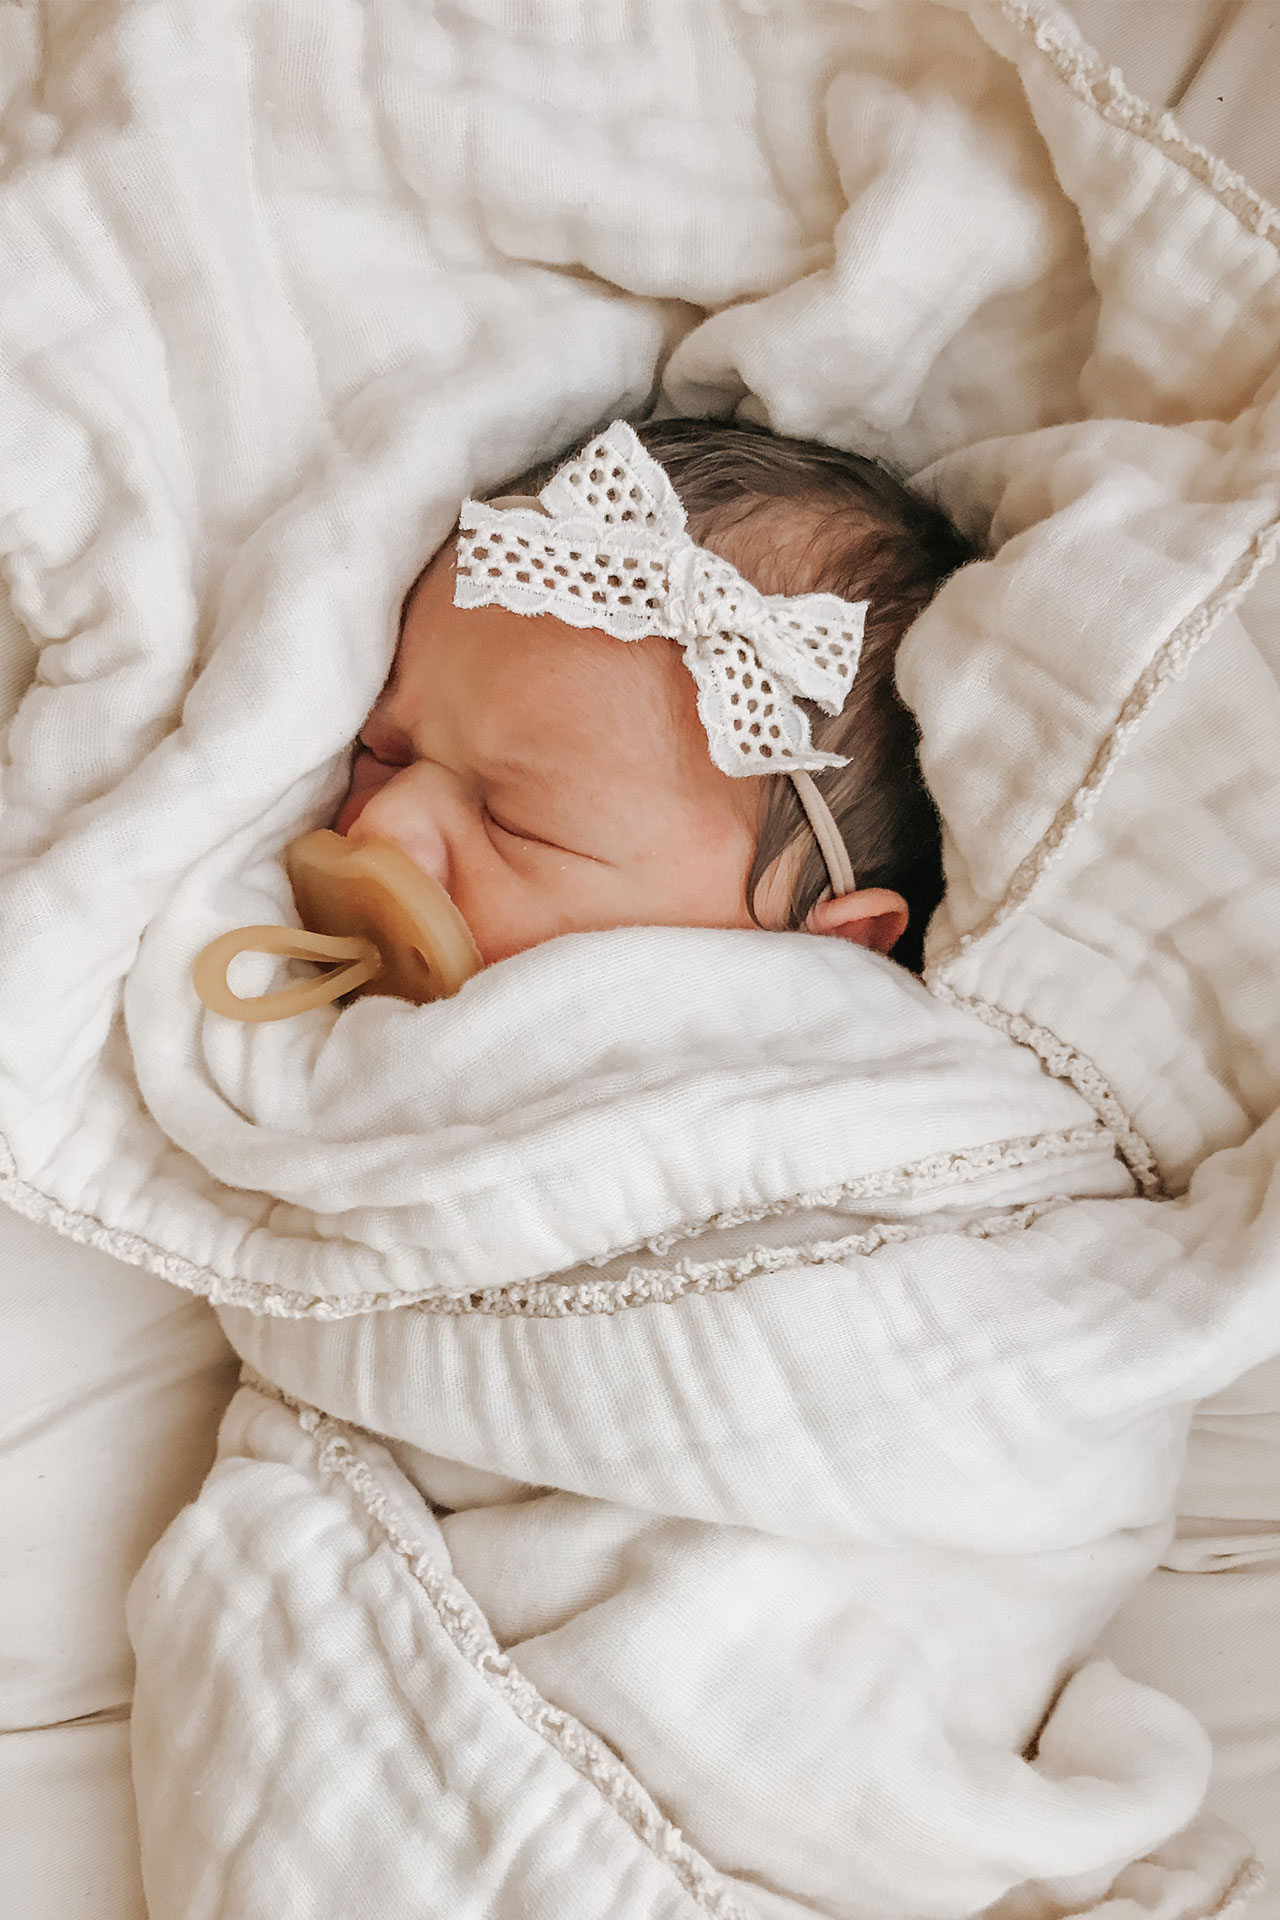 Infant Sleeping in Blanked with Pacifier After Preset